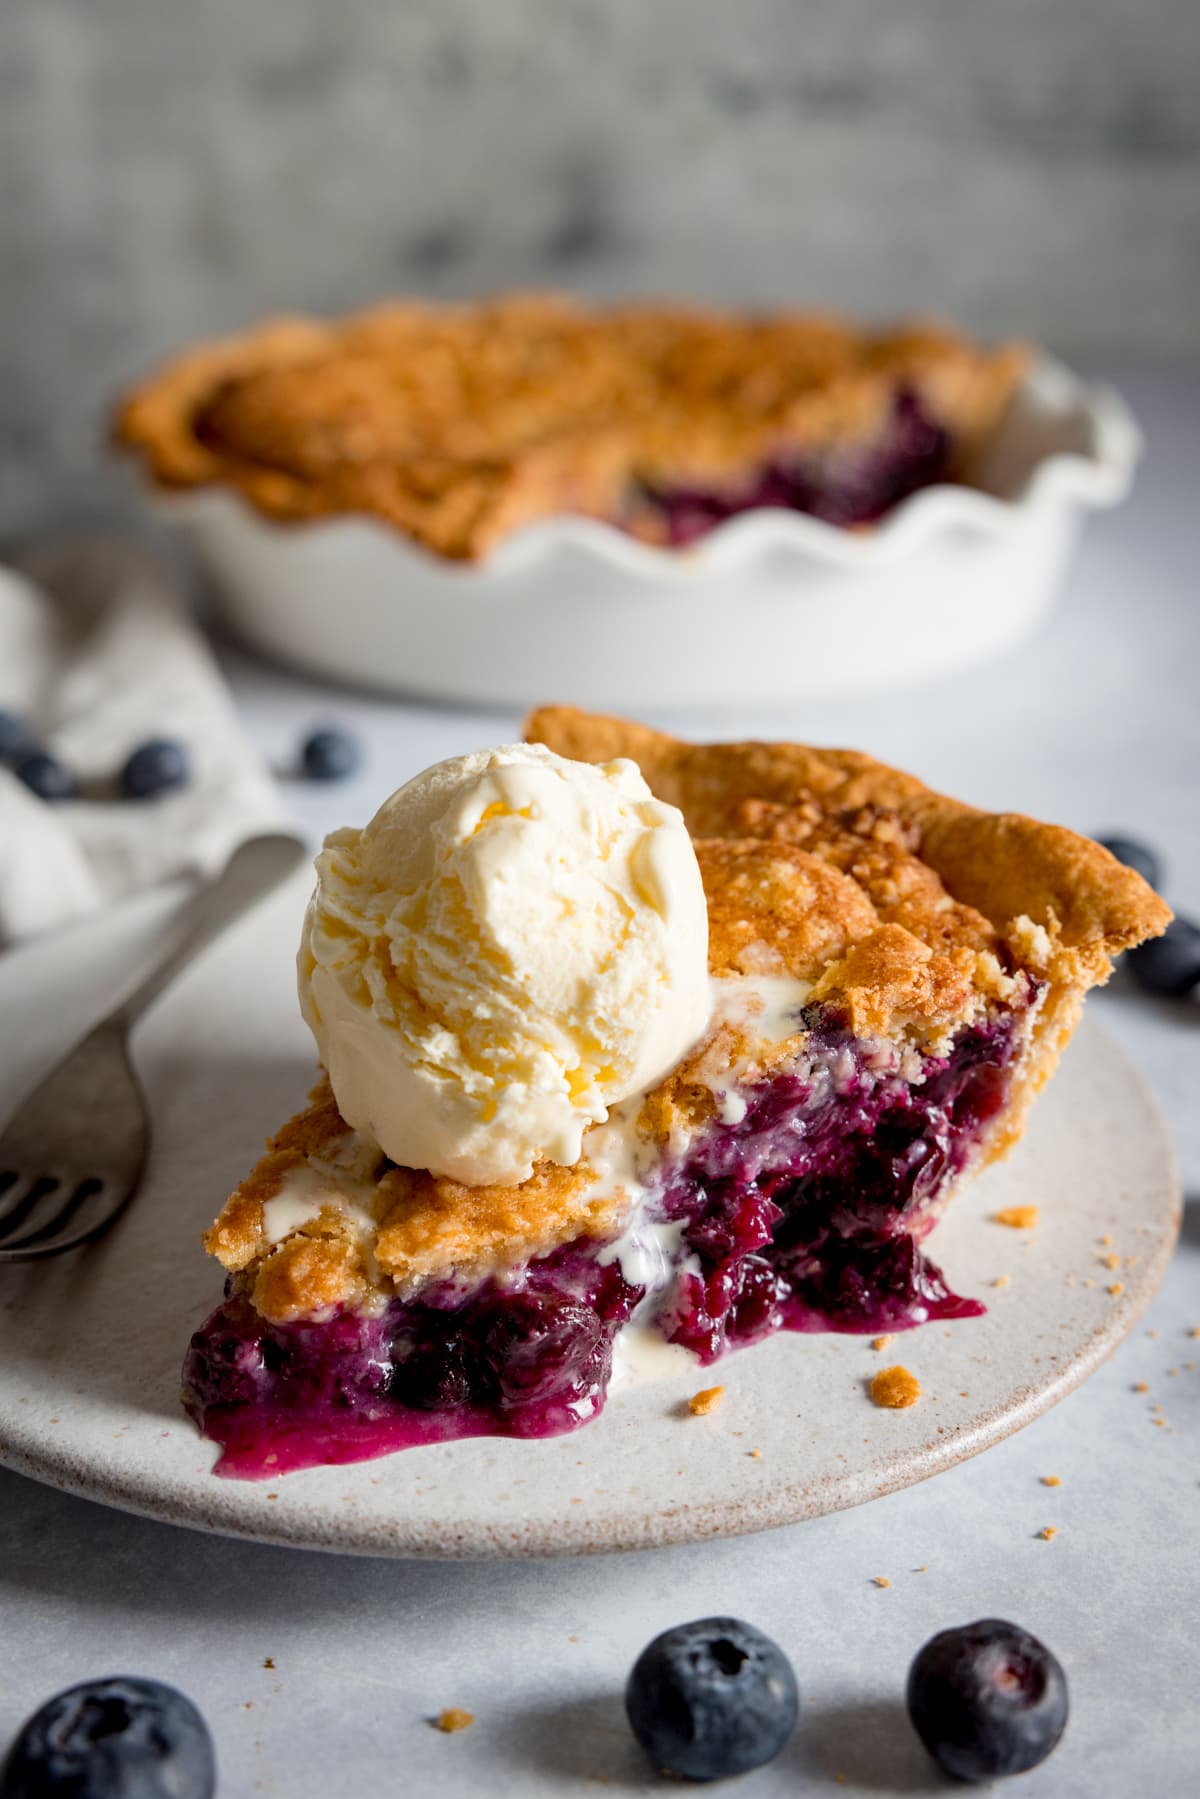 A slice of blueberry crumble pie on a white plate, topped with a scoop of vanilla ice cream.
There is a dessert fork on the plate and the plate is on a white background.
There are fresh blueberries scattered around the plate.
The rest of the pie is in the background in a white pie dish.